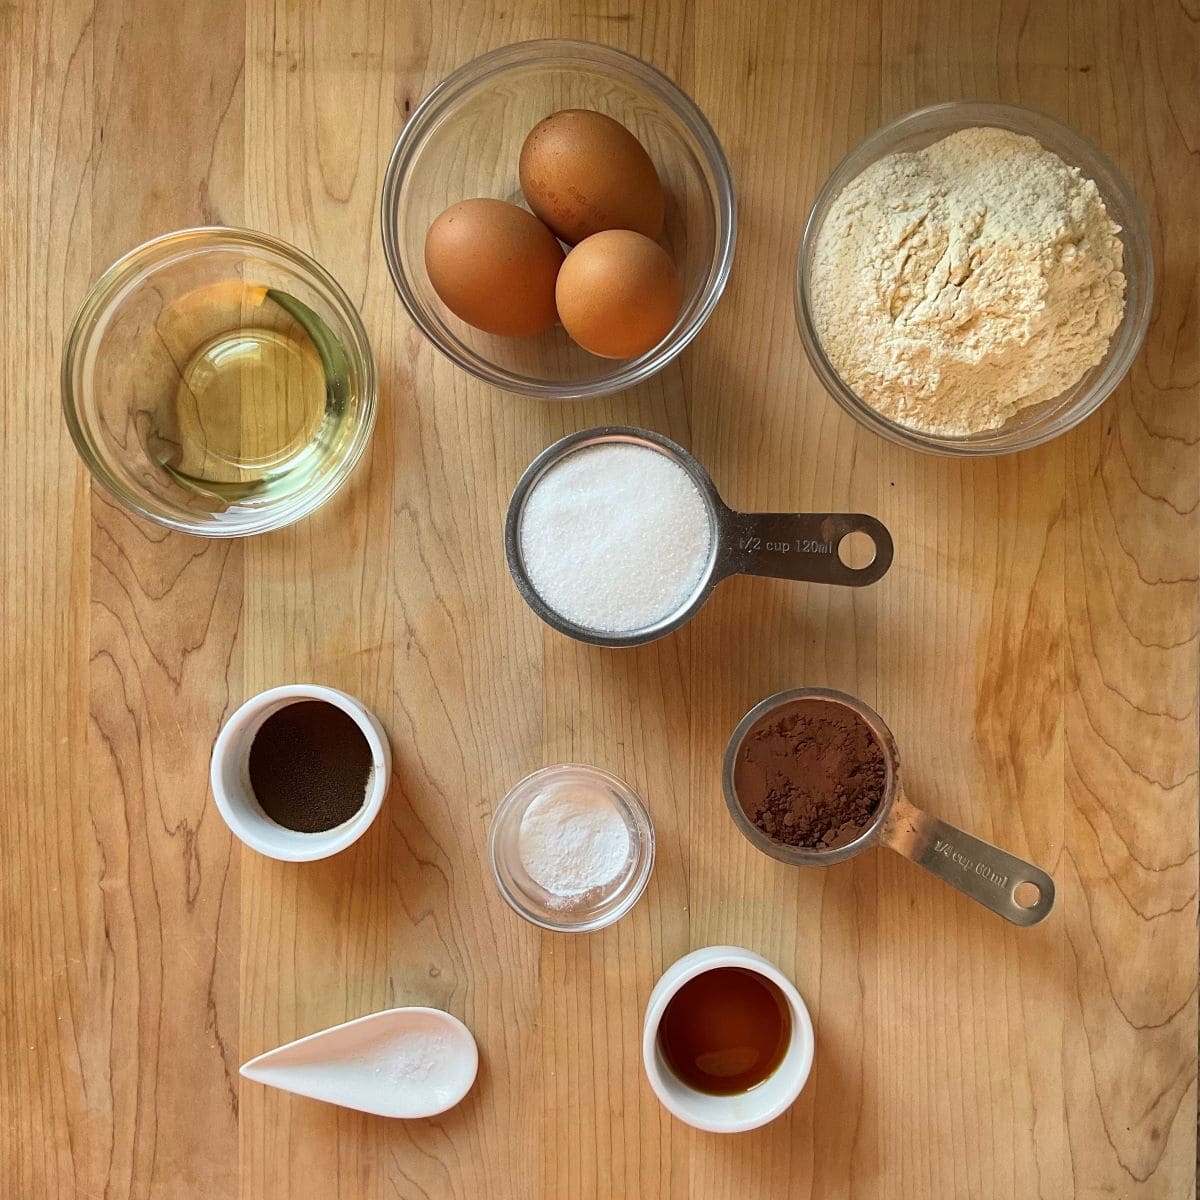 The ingredients to make a chocolate pizzelle recipe on a wooden board.